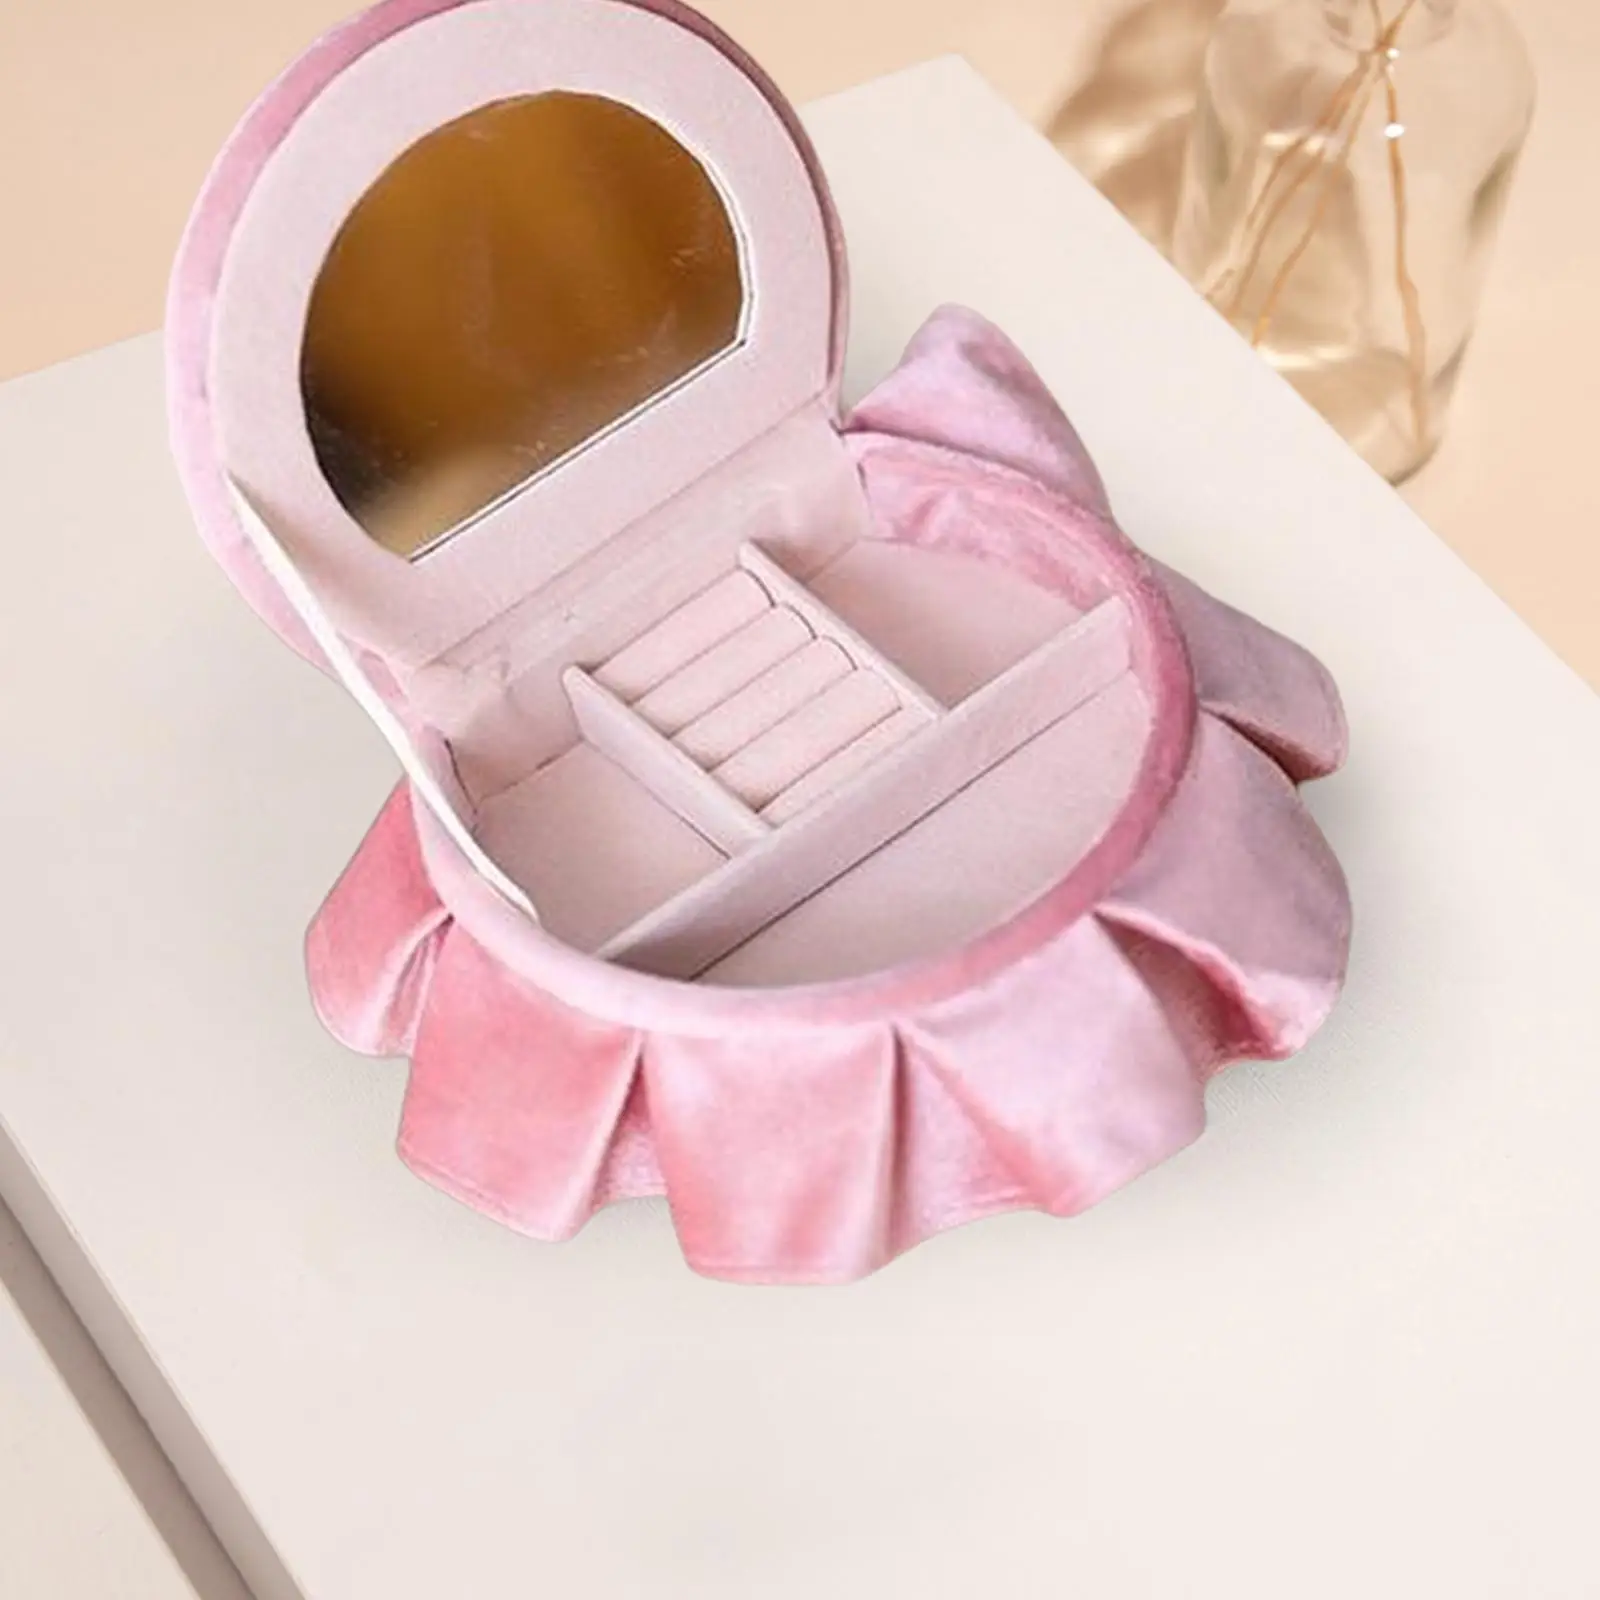 Dollhouse bed Toy Resin Mini Furniture Jewelry Storage Case for Dollhouse Bedroom Decor Girls and Women Kids